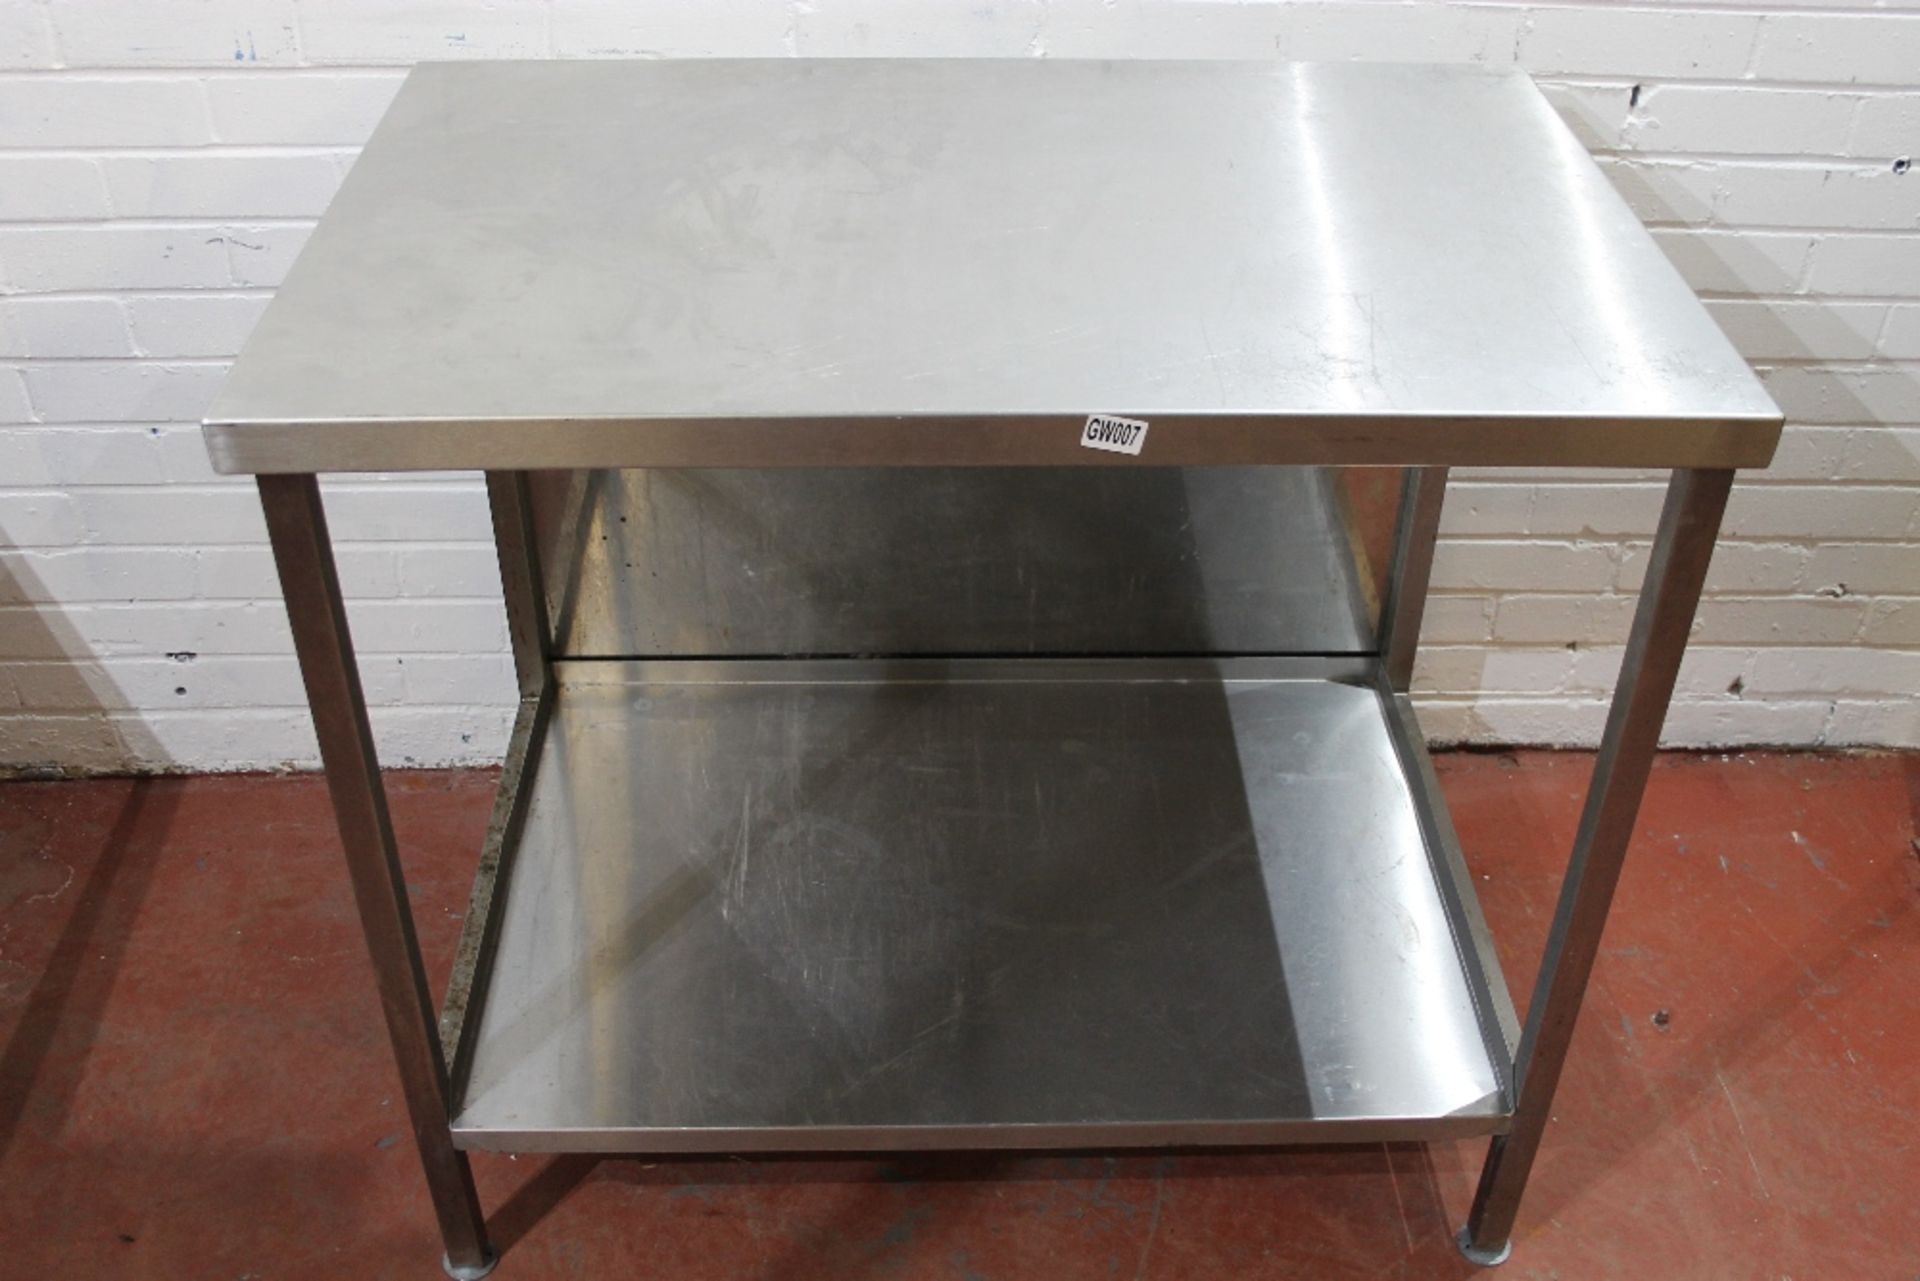 Small Stainless Steel Table with Under Shelf – NO VAT W100cm x H90cm x D65cm - Image 3 of 3